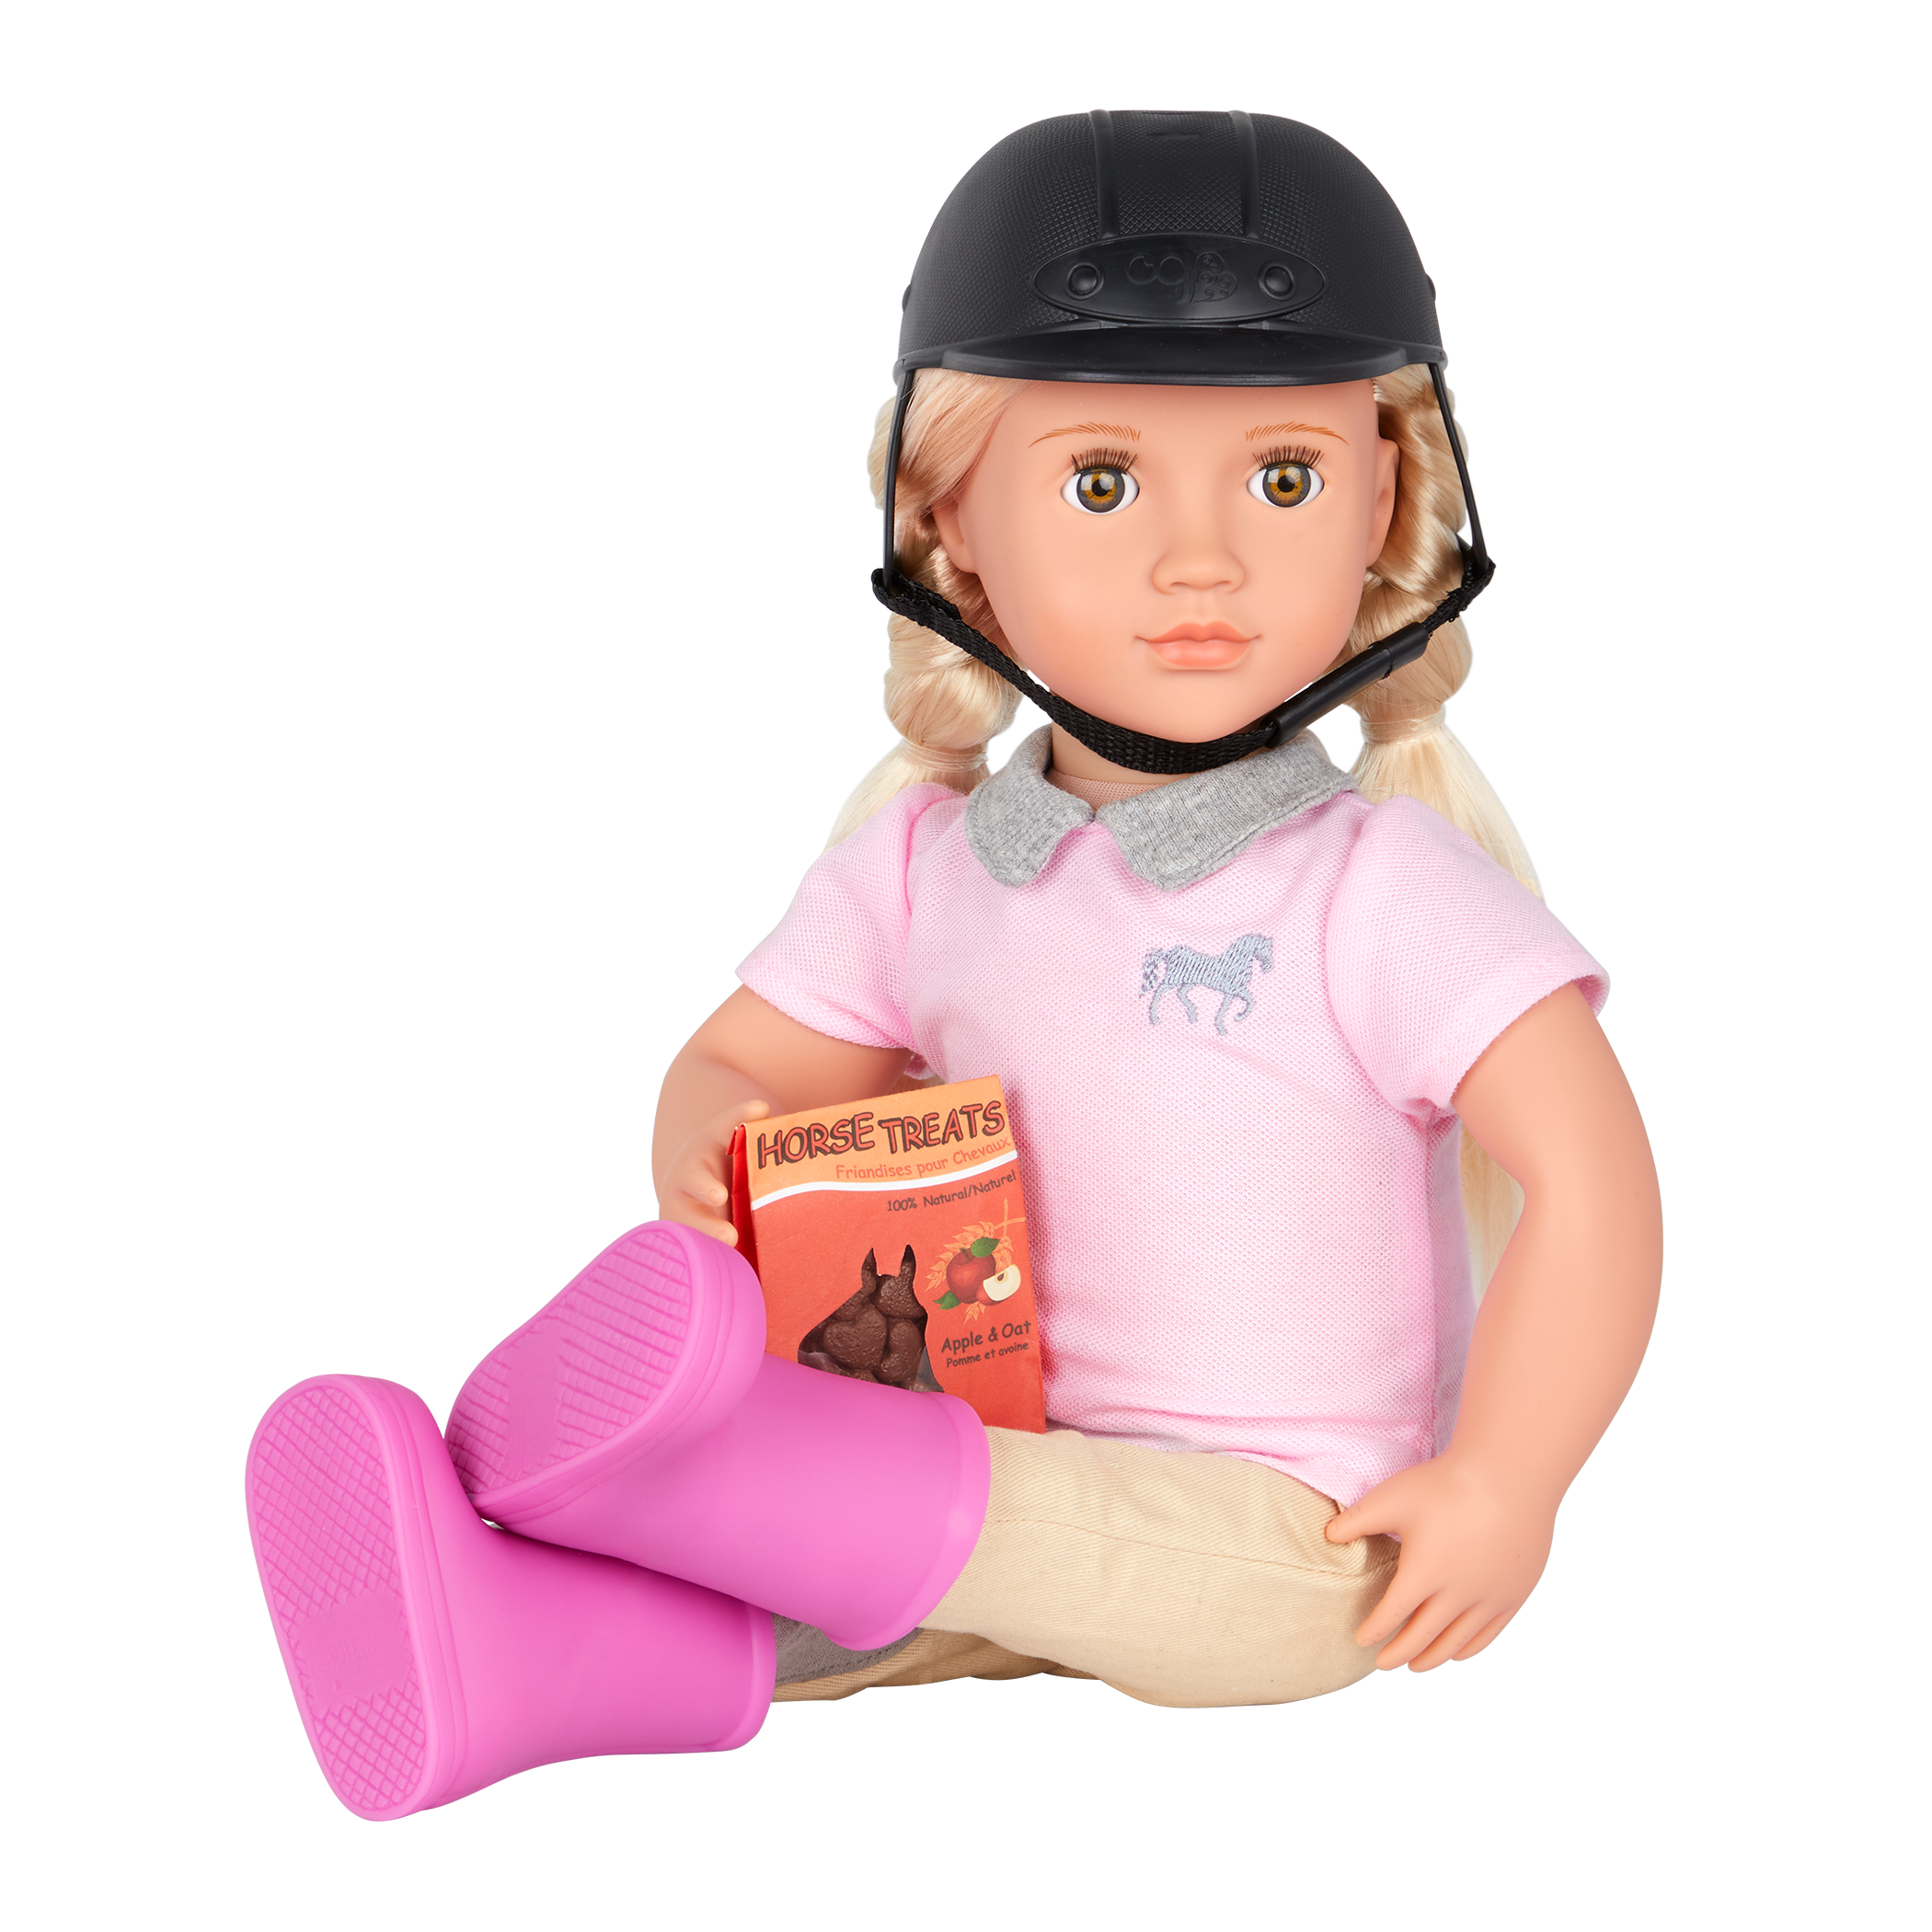 18-inch doll with blonde hair, light brown eyes, equestrian accessories and storybook